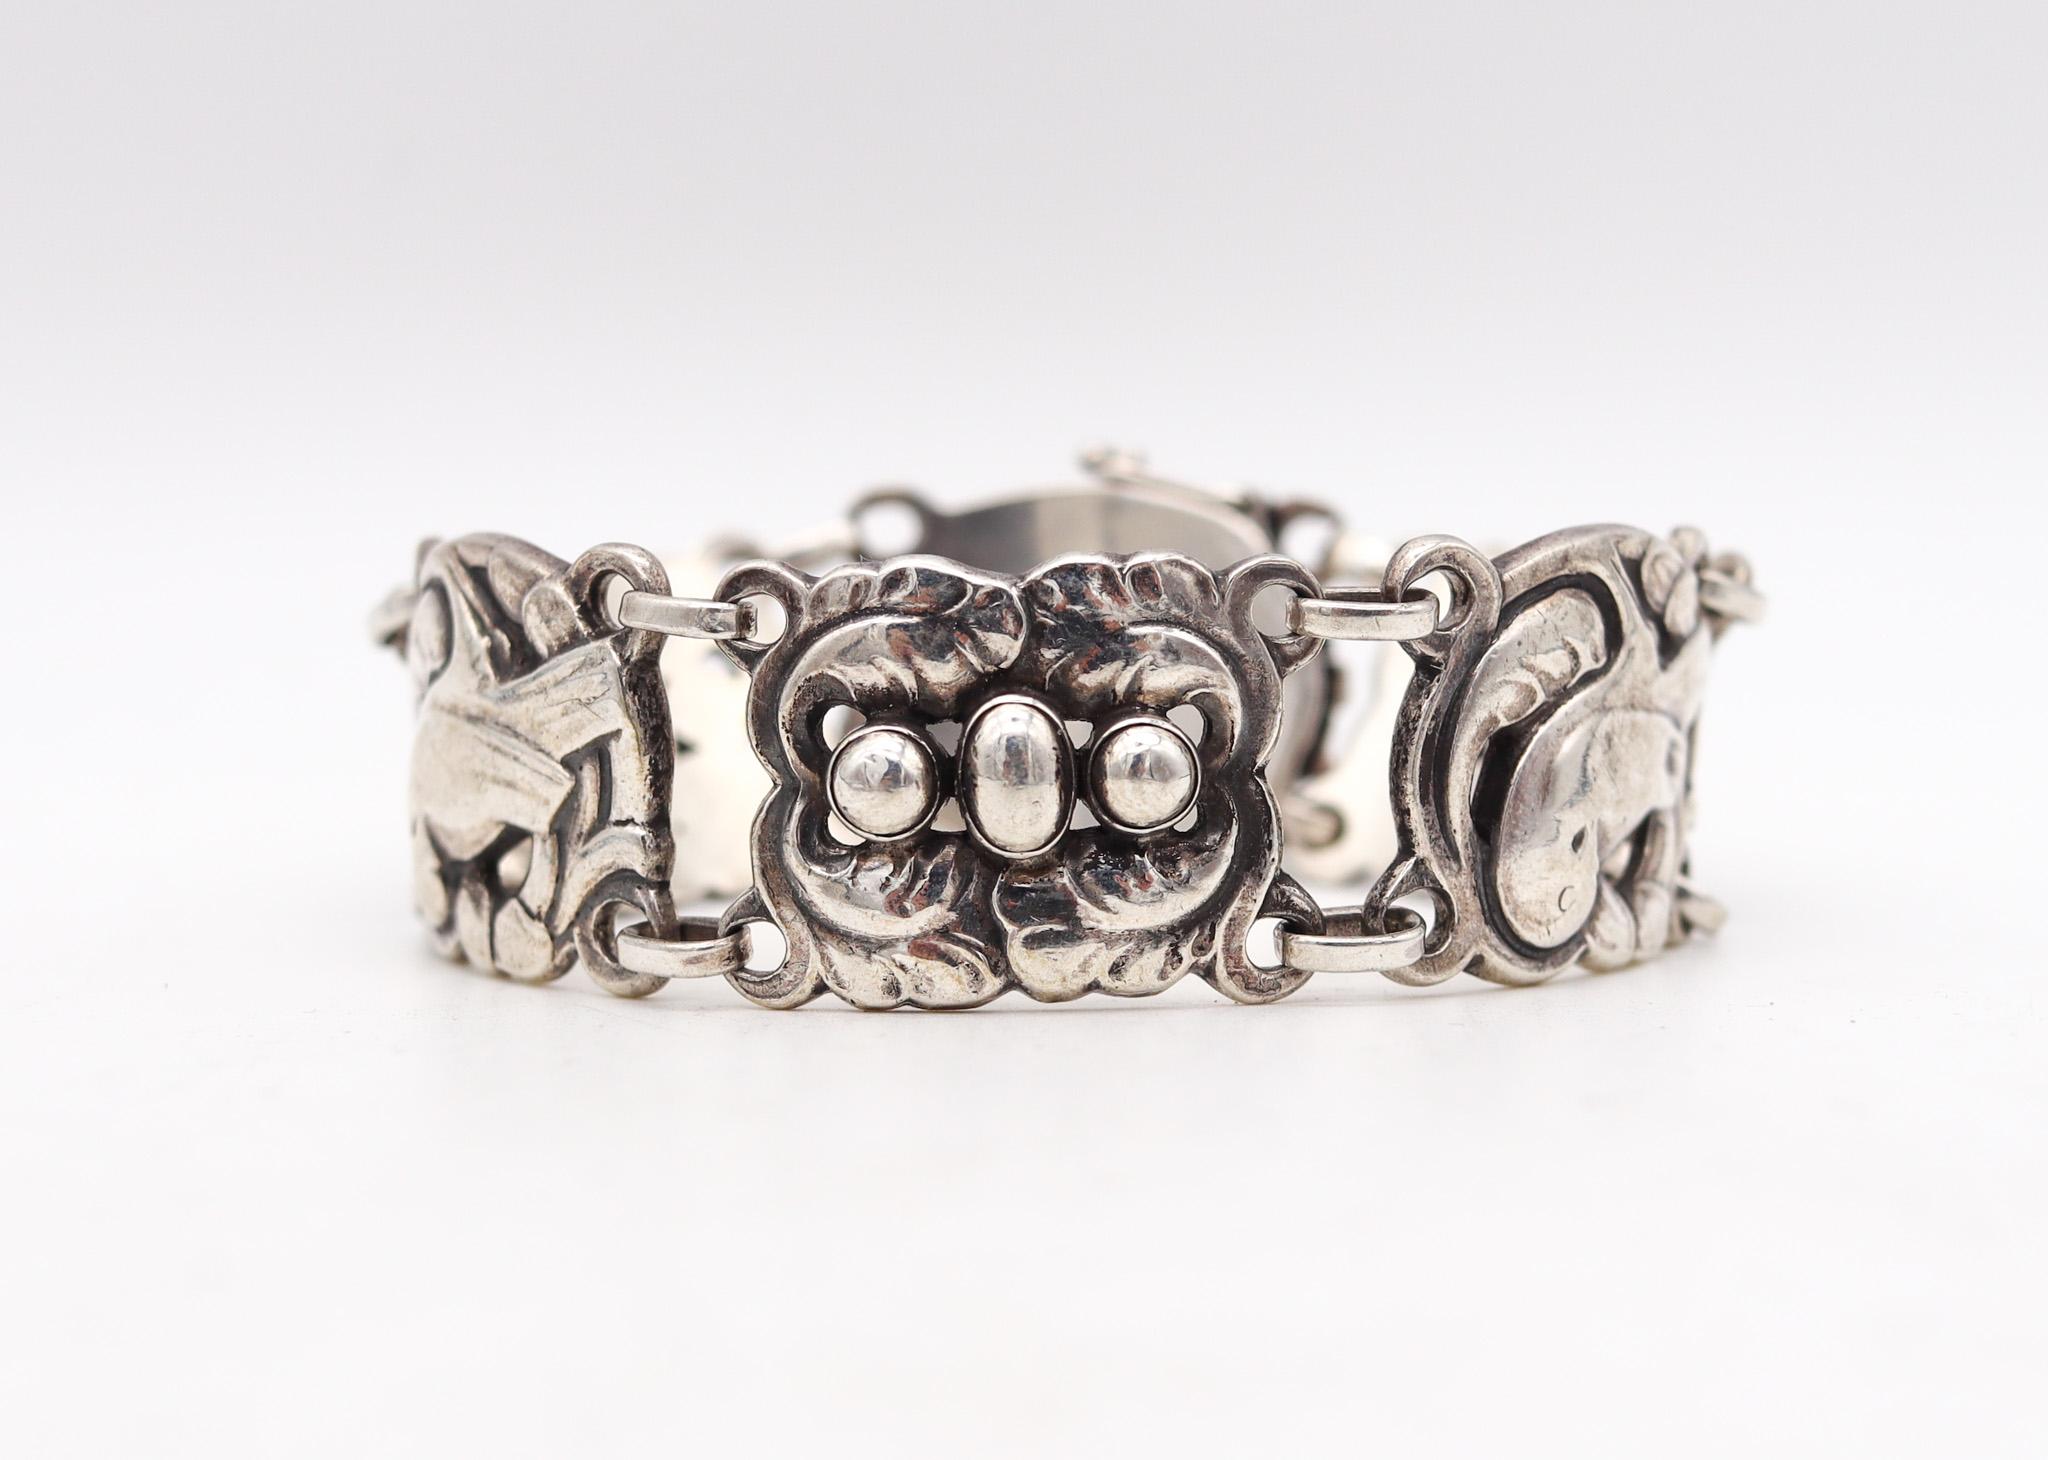 Art nouveau bracelet designed by Kristian Mohl-Hansen for Georg Jensen.

This is one of the most early and iconic bracelet, created in Copenhagen Denmark by the silversmith designer Kristian Mohl-Hansen for the Georg Jensen company, back in the